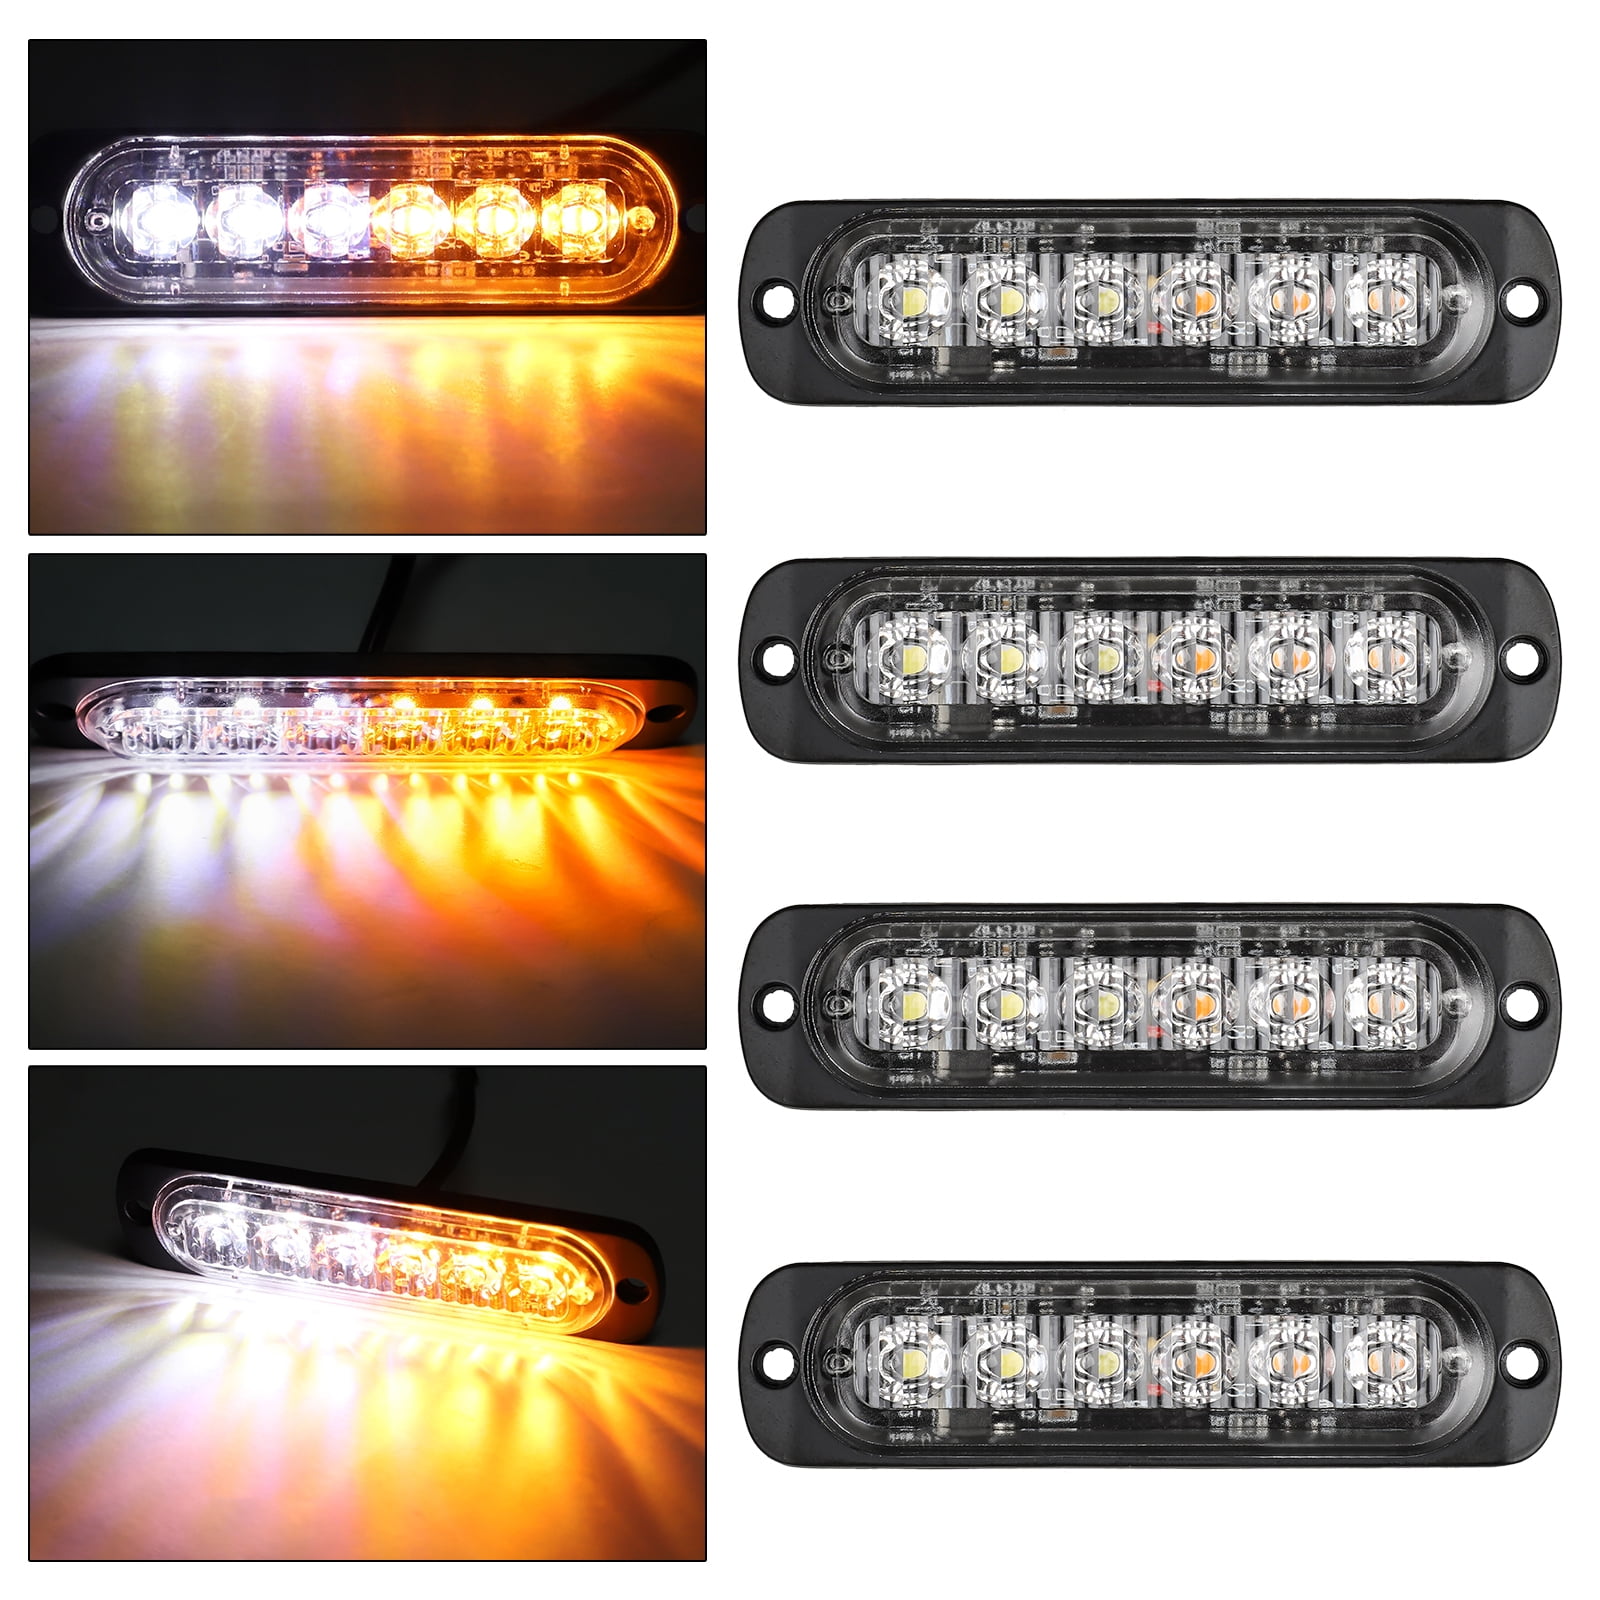 Led Warning Lights 12-LED 4pcs Ultra Slim Sync Feature Car Truck with Main Control Box Surface Mount